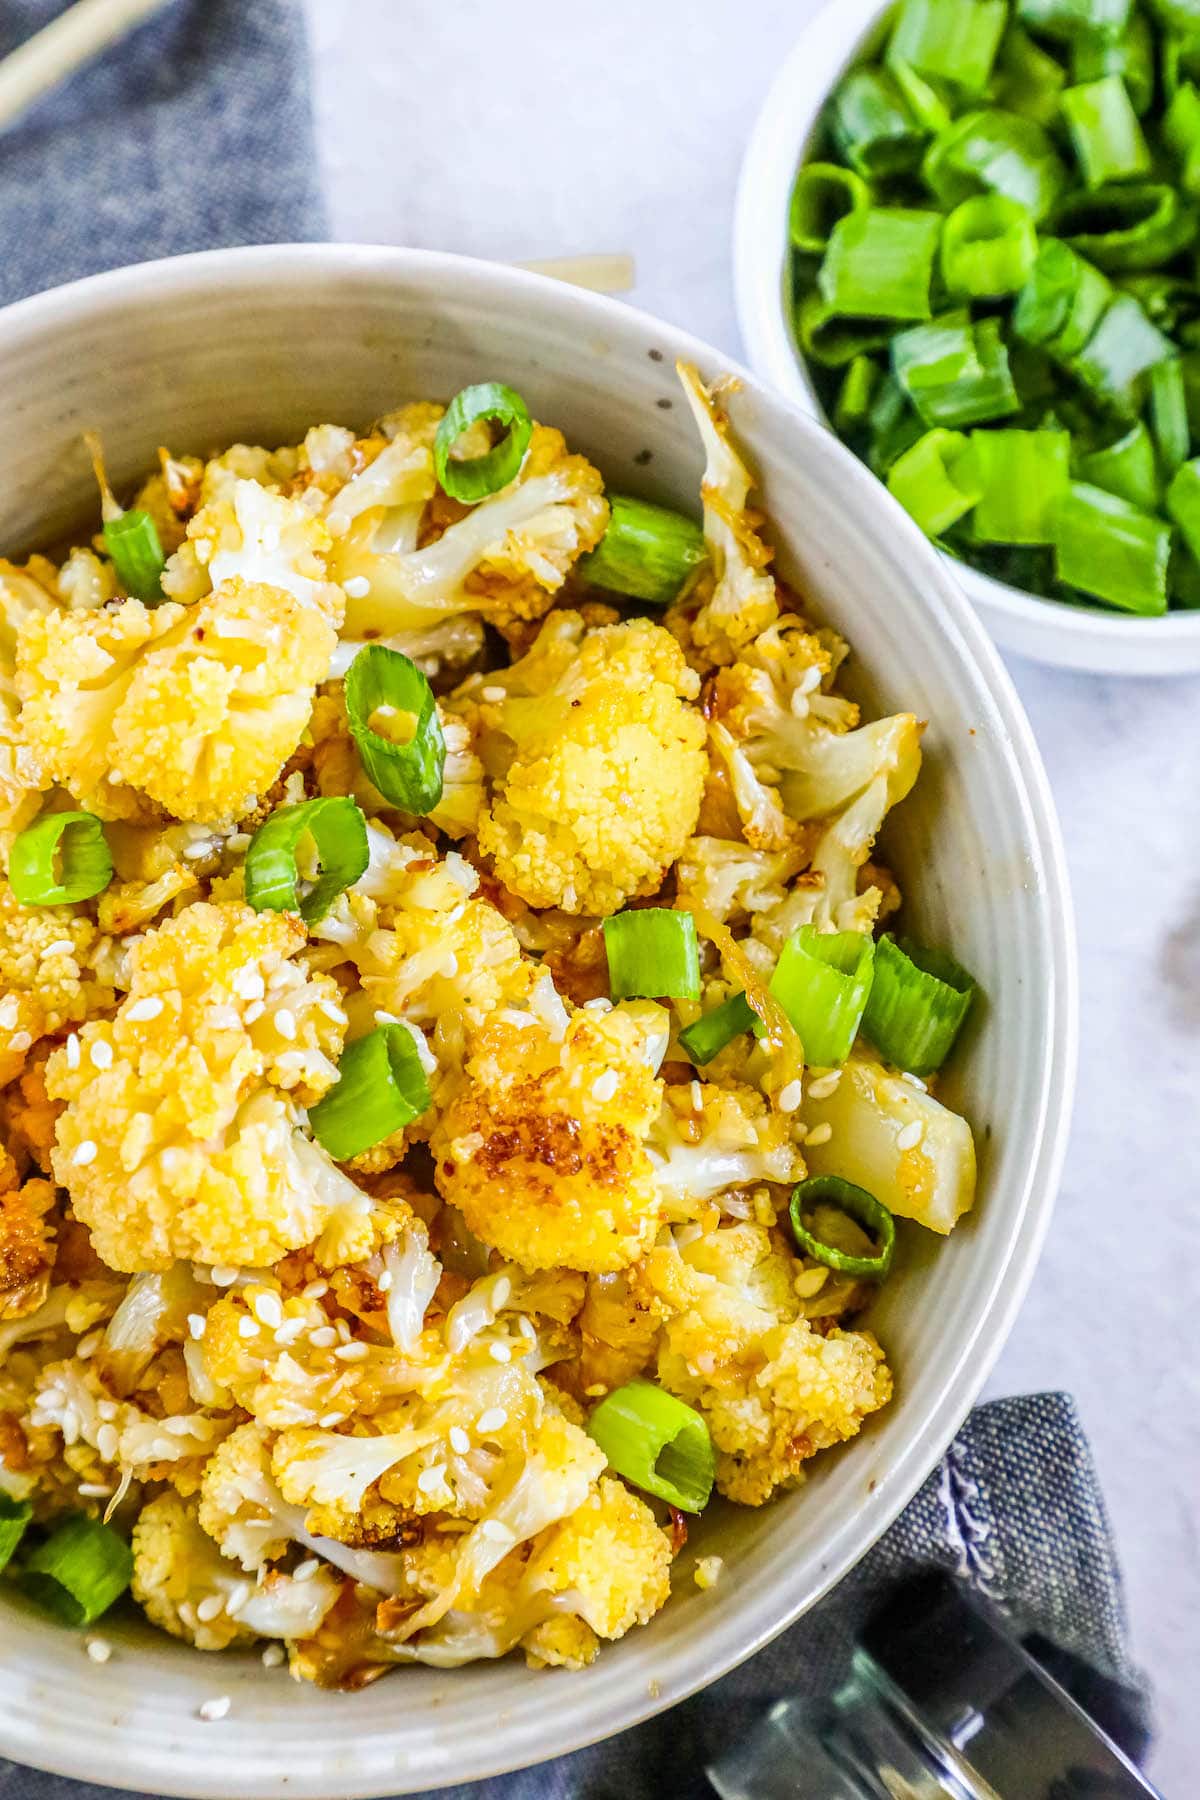 baked cauliflower with sesame seeds, sliced green onions, and seasoning in a white bowl on a table